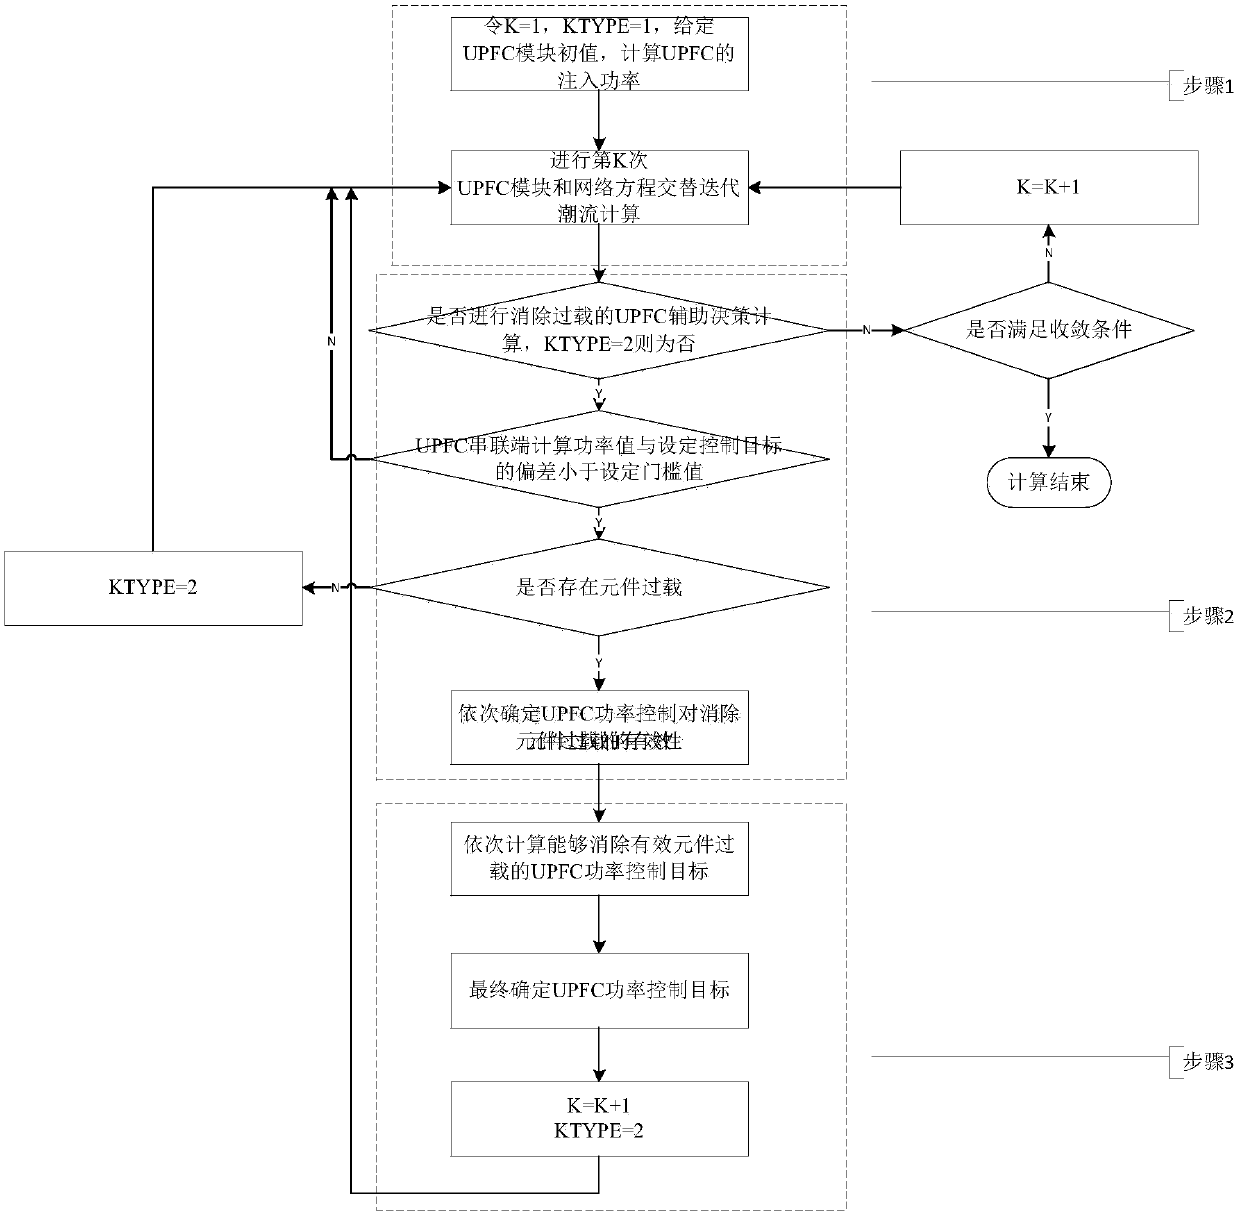 Auxiliary decision-making calculation method for eliminating overload of near-zone equipment of unified power flower controller (UPFC)